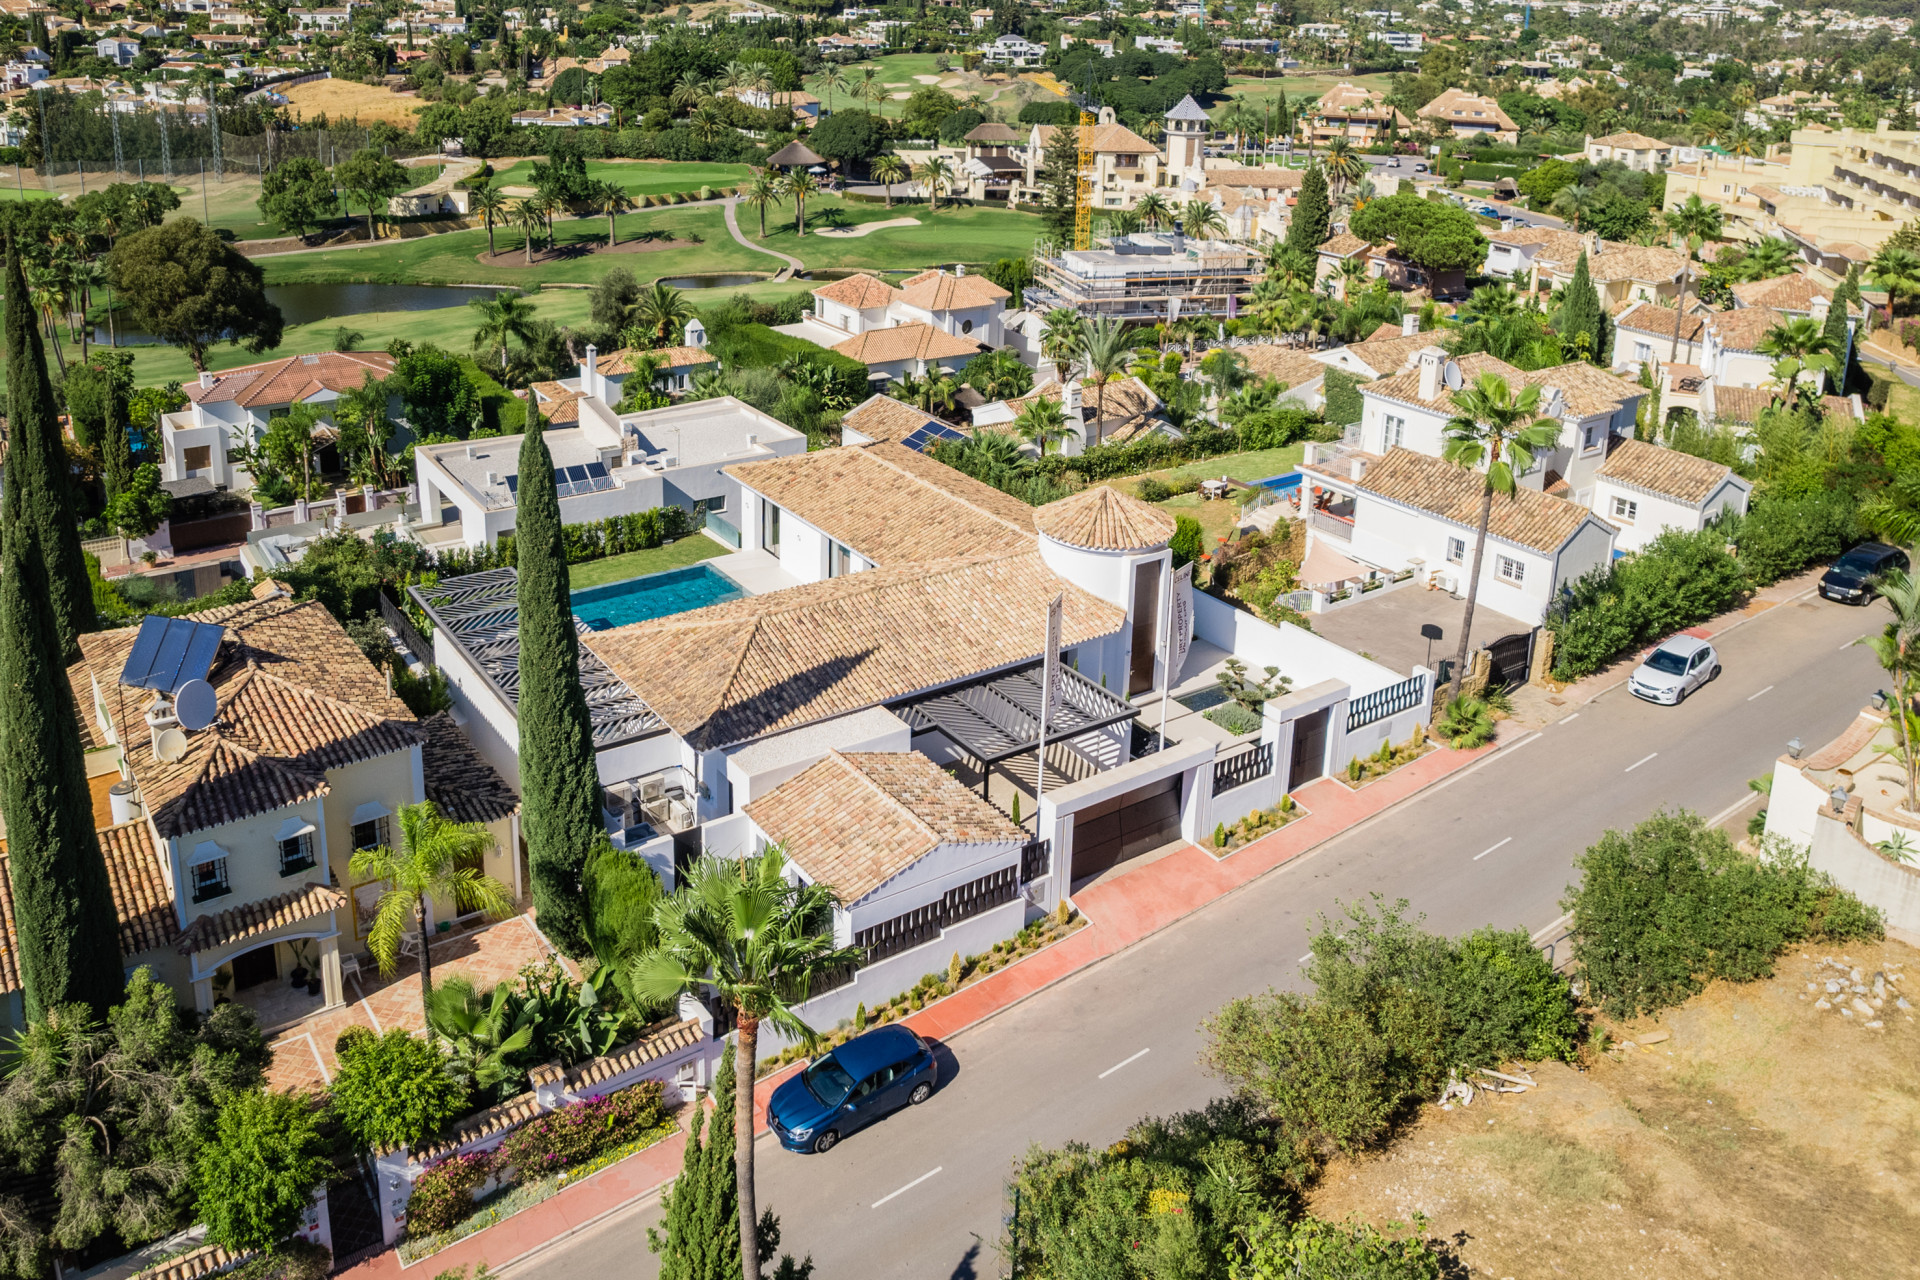 Elegant villa located in the sought after residential area of Los Naranjos, Marbella.